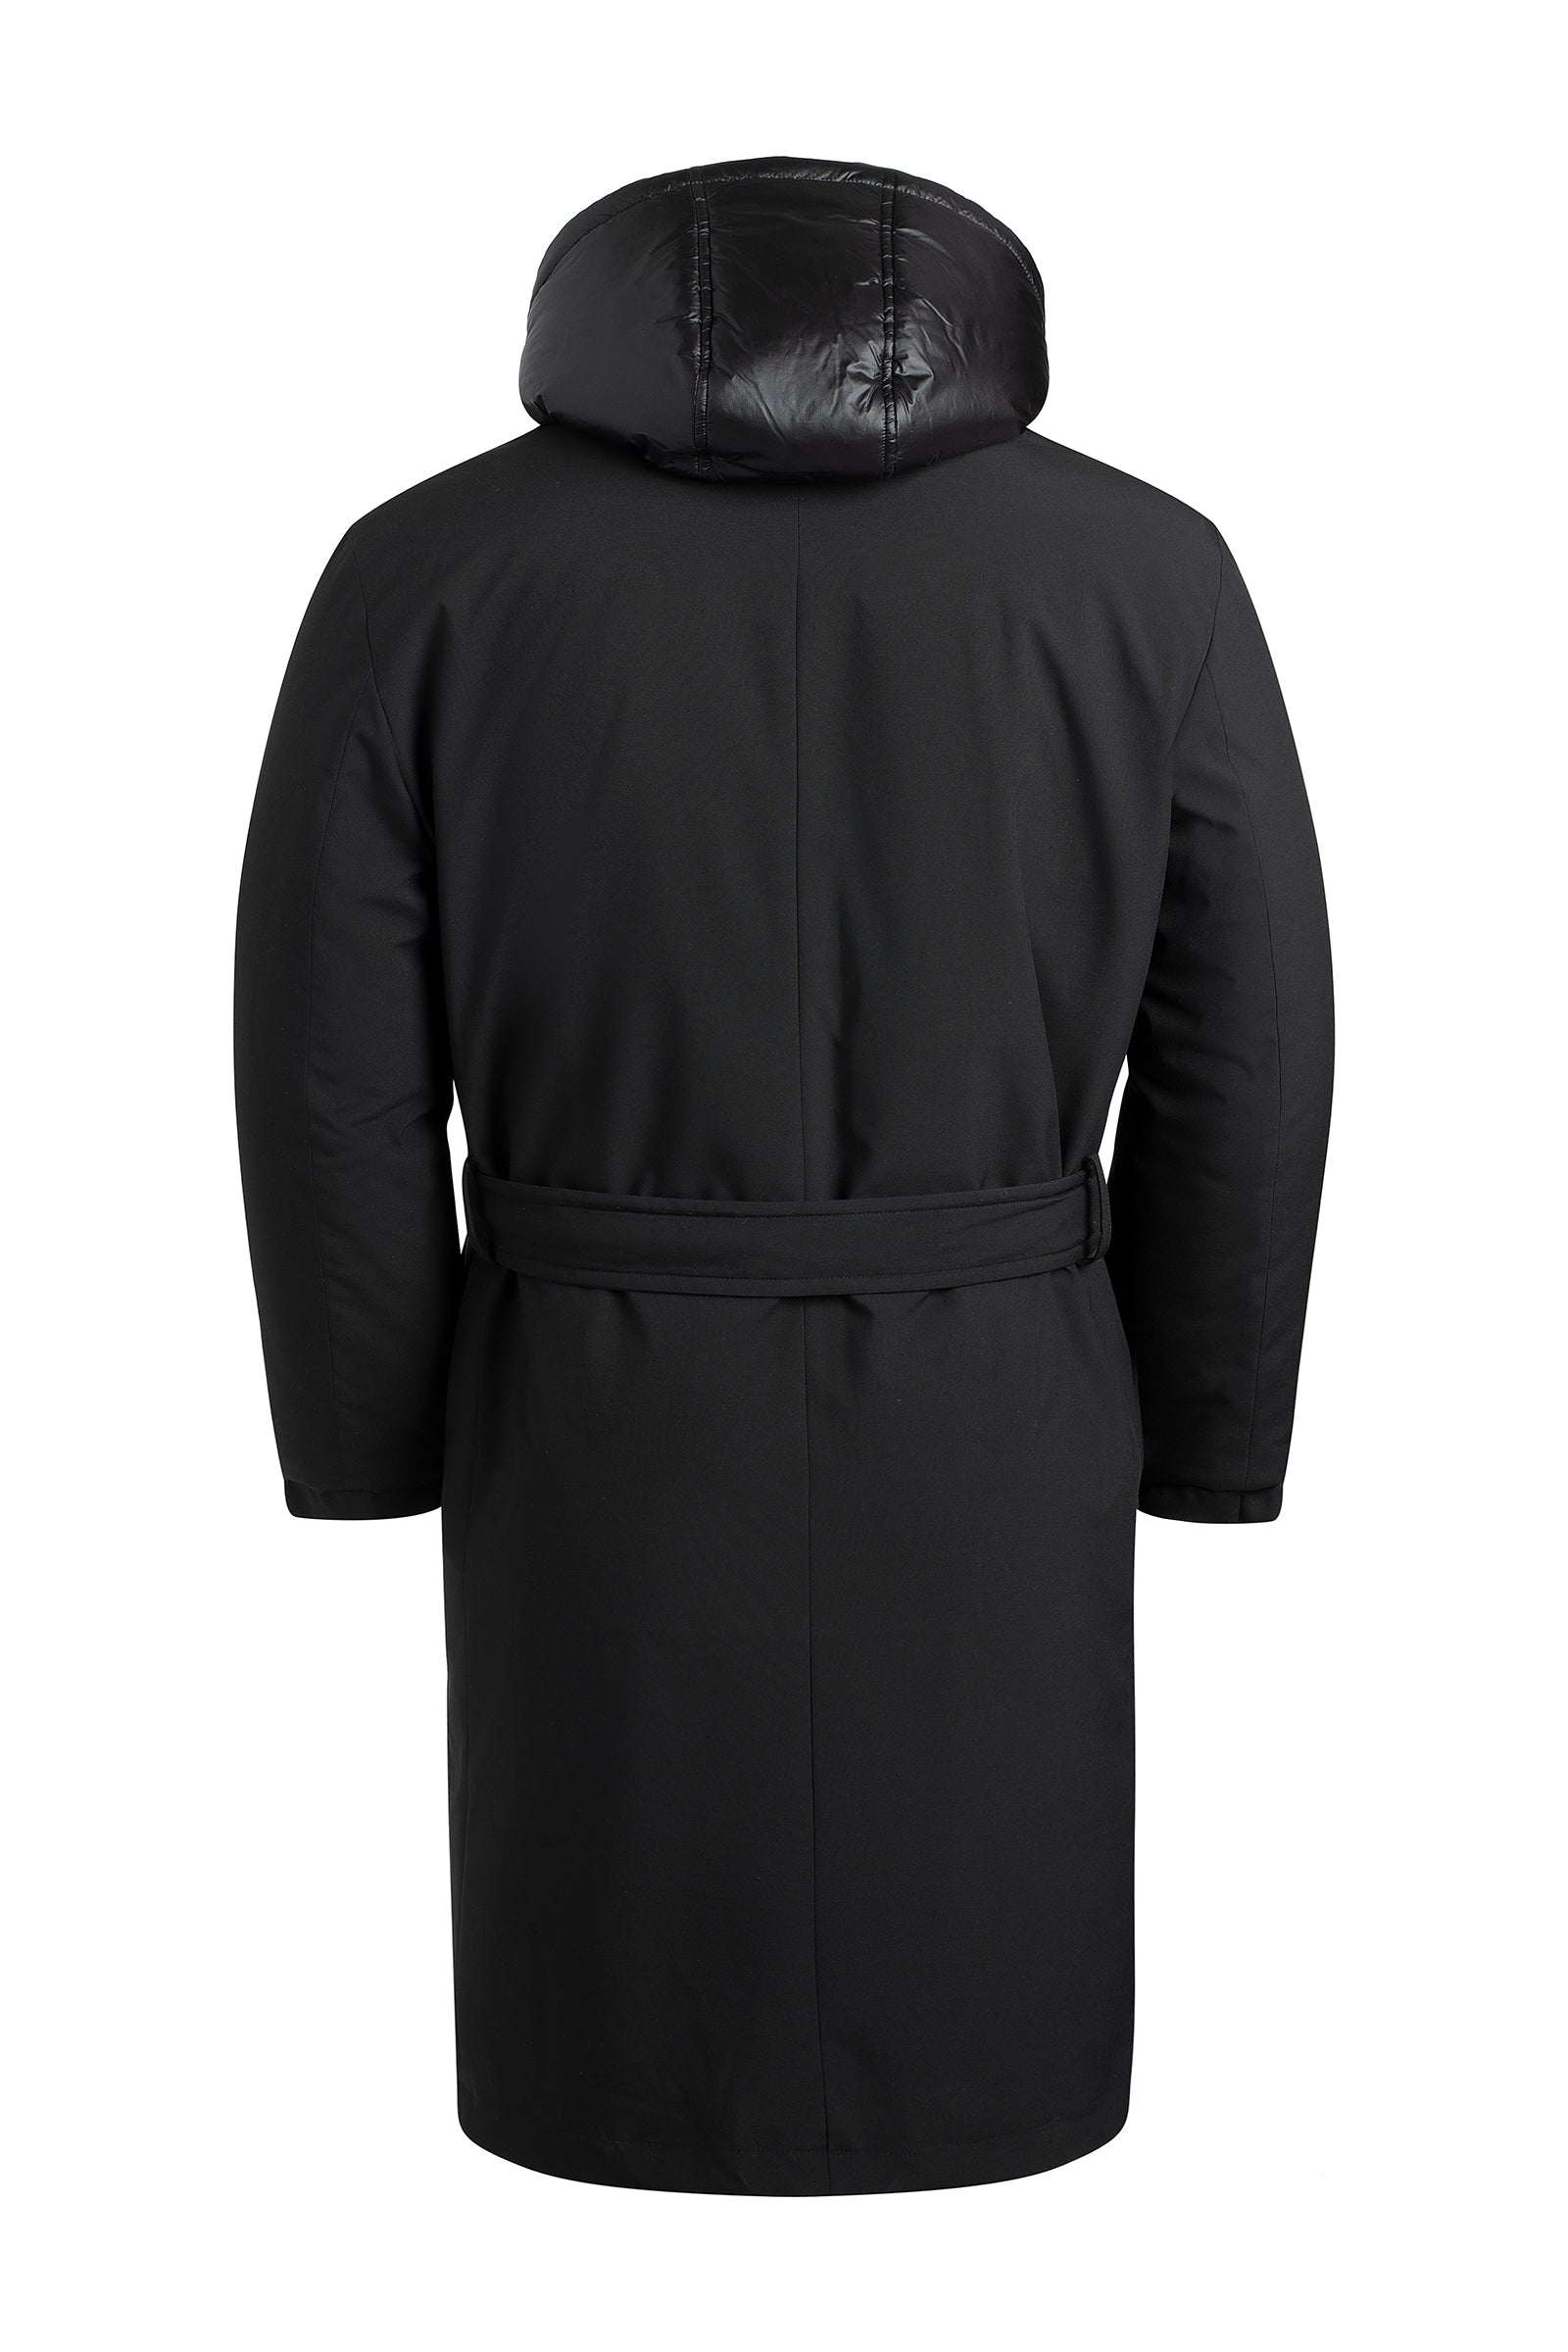 TYLER BLACK TRENCH COAT WITH PRIMALOFT LINING - Cardinal of Canada-CA - Tyler black belted trench coat 42 inch length with primaloft